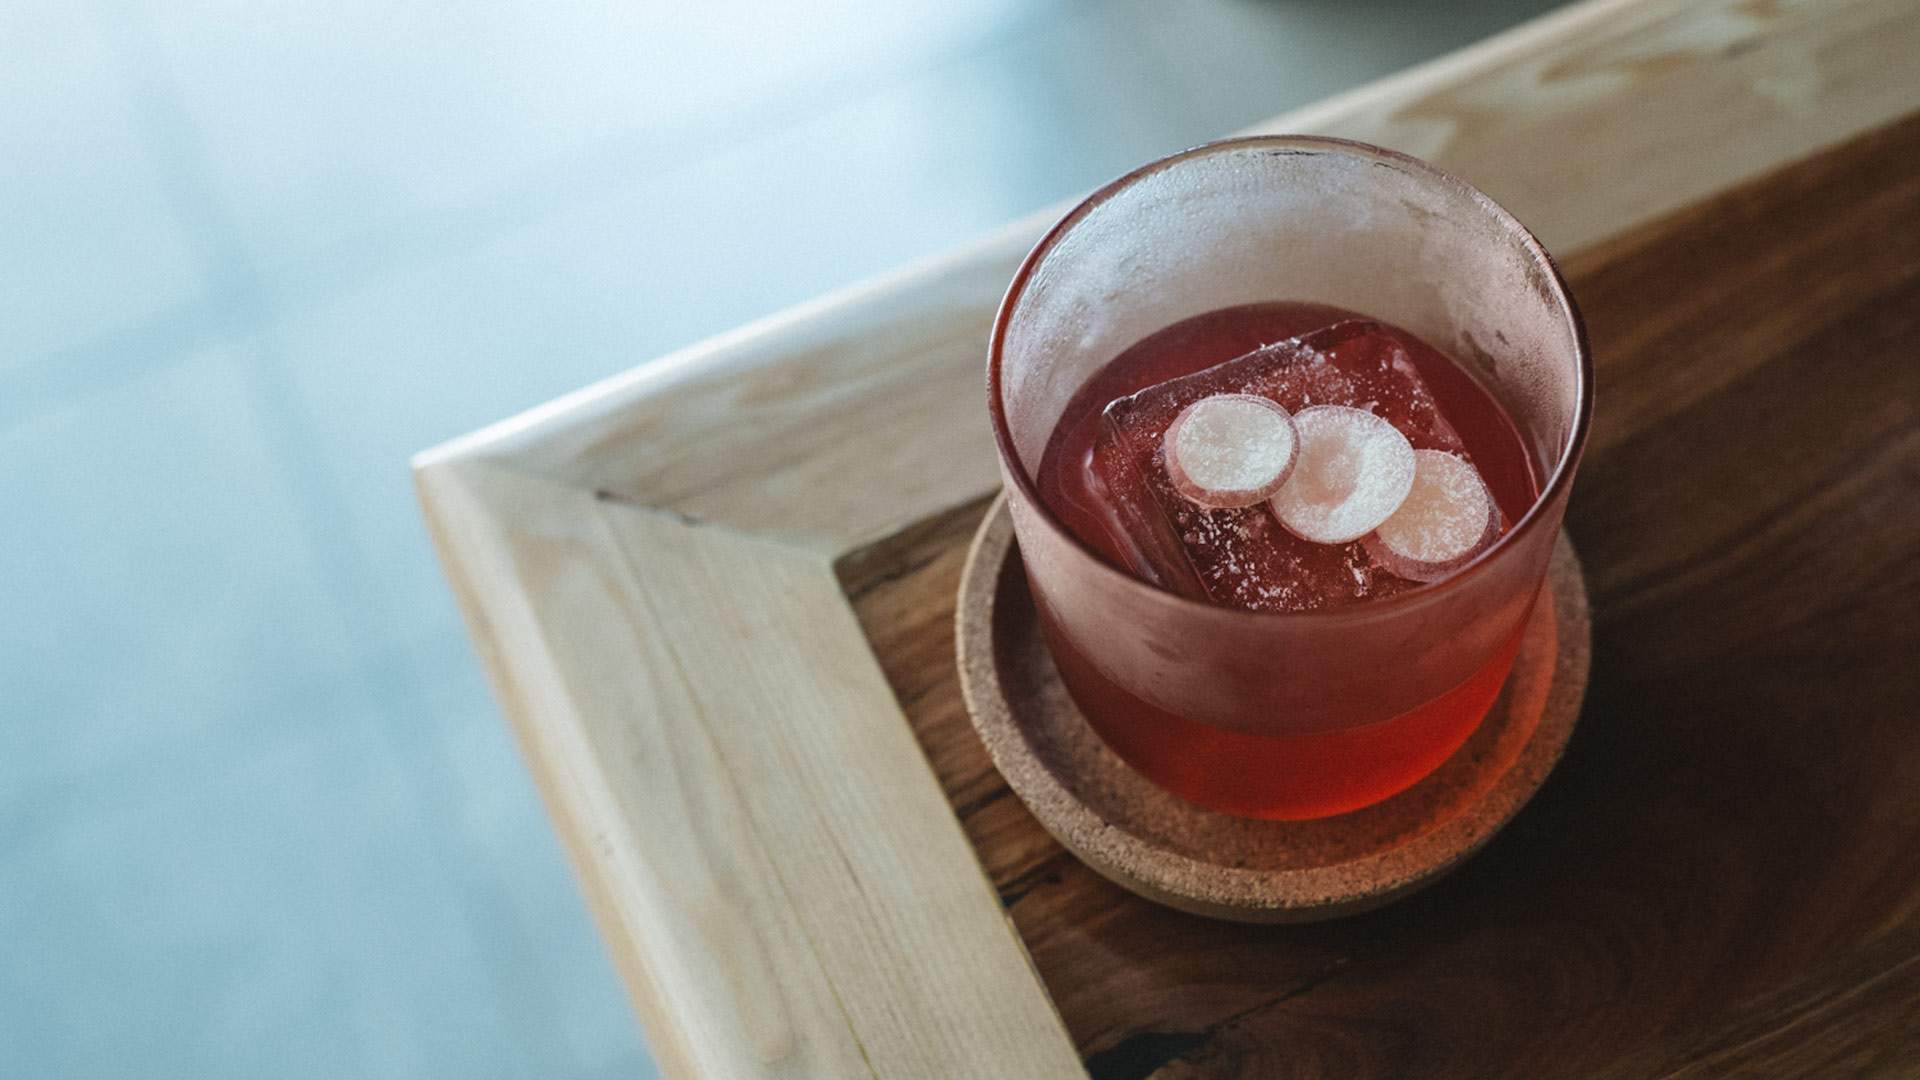 Here's What to Expect from the Soon-to-Open Cocktail Bar By Three Black Pearl Alumni